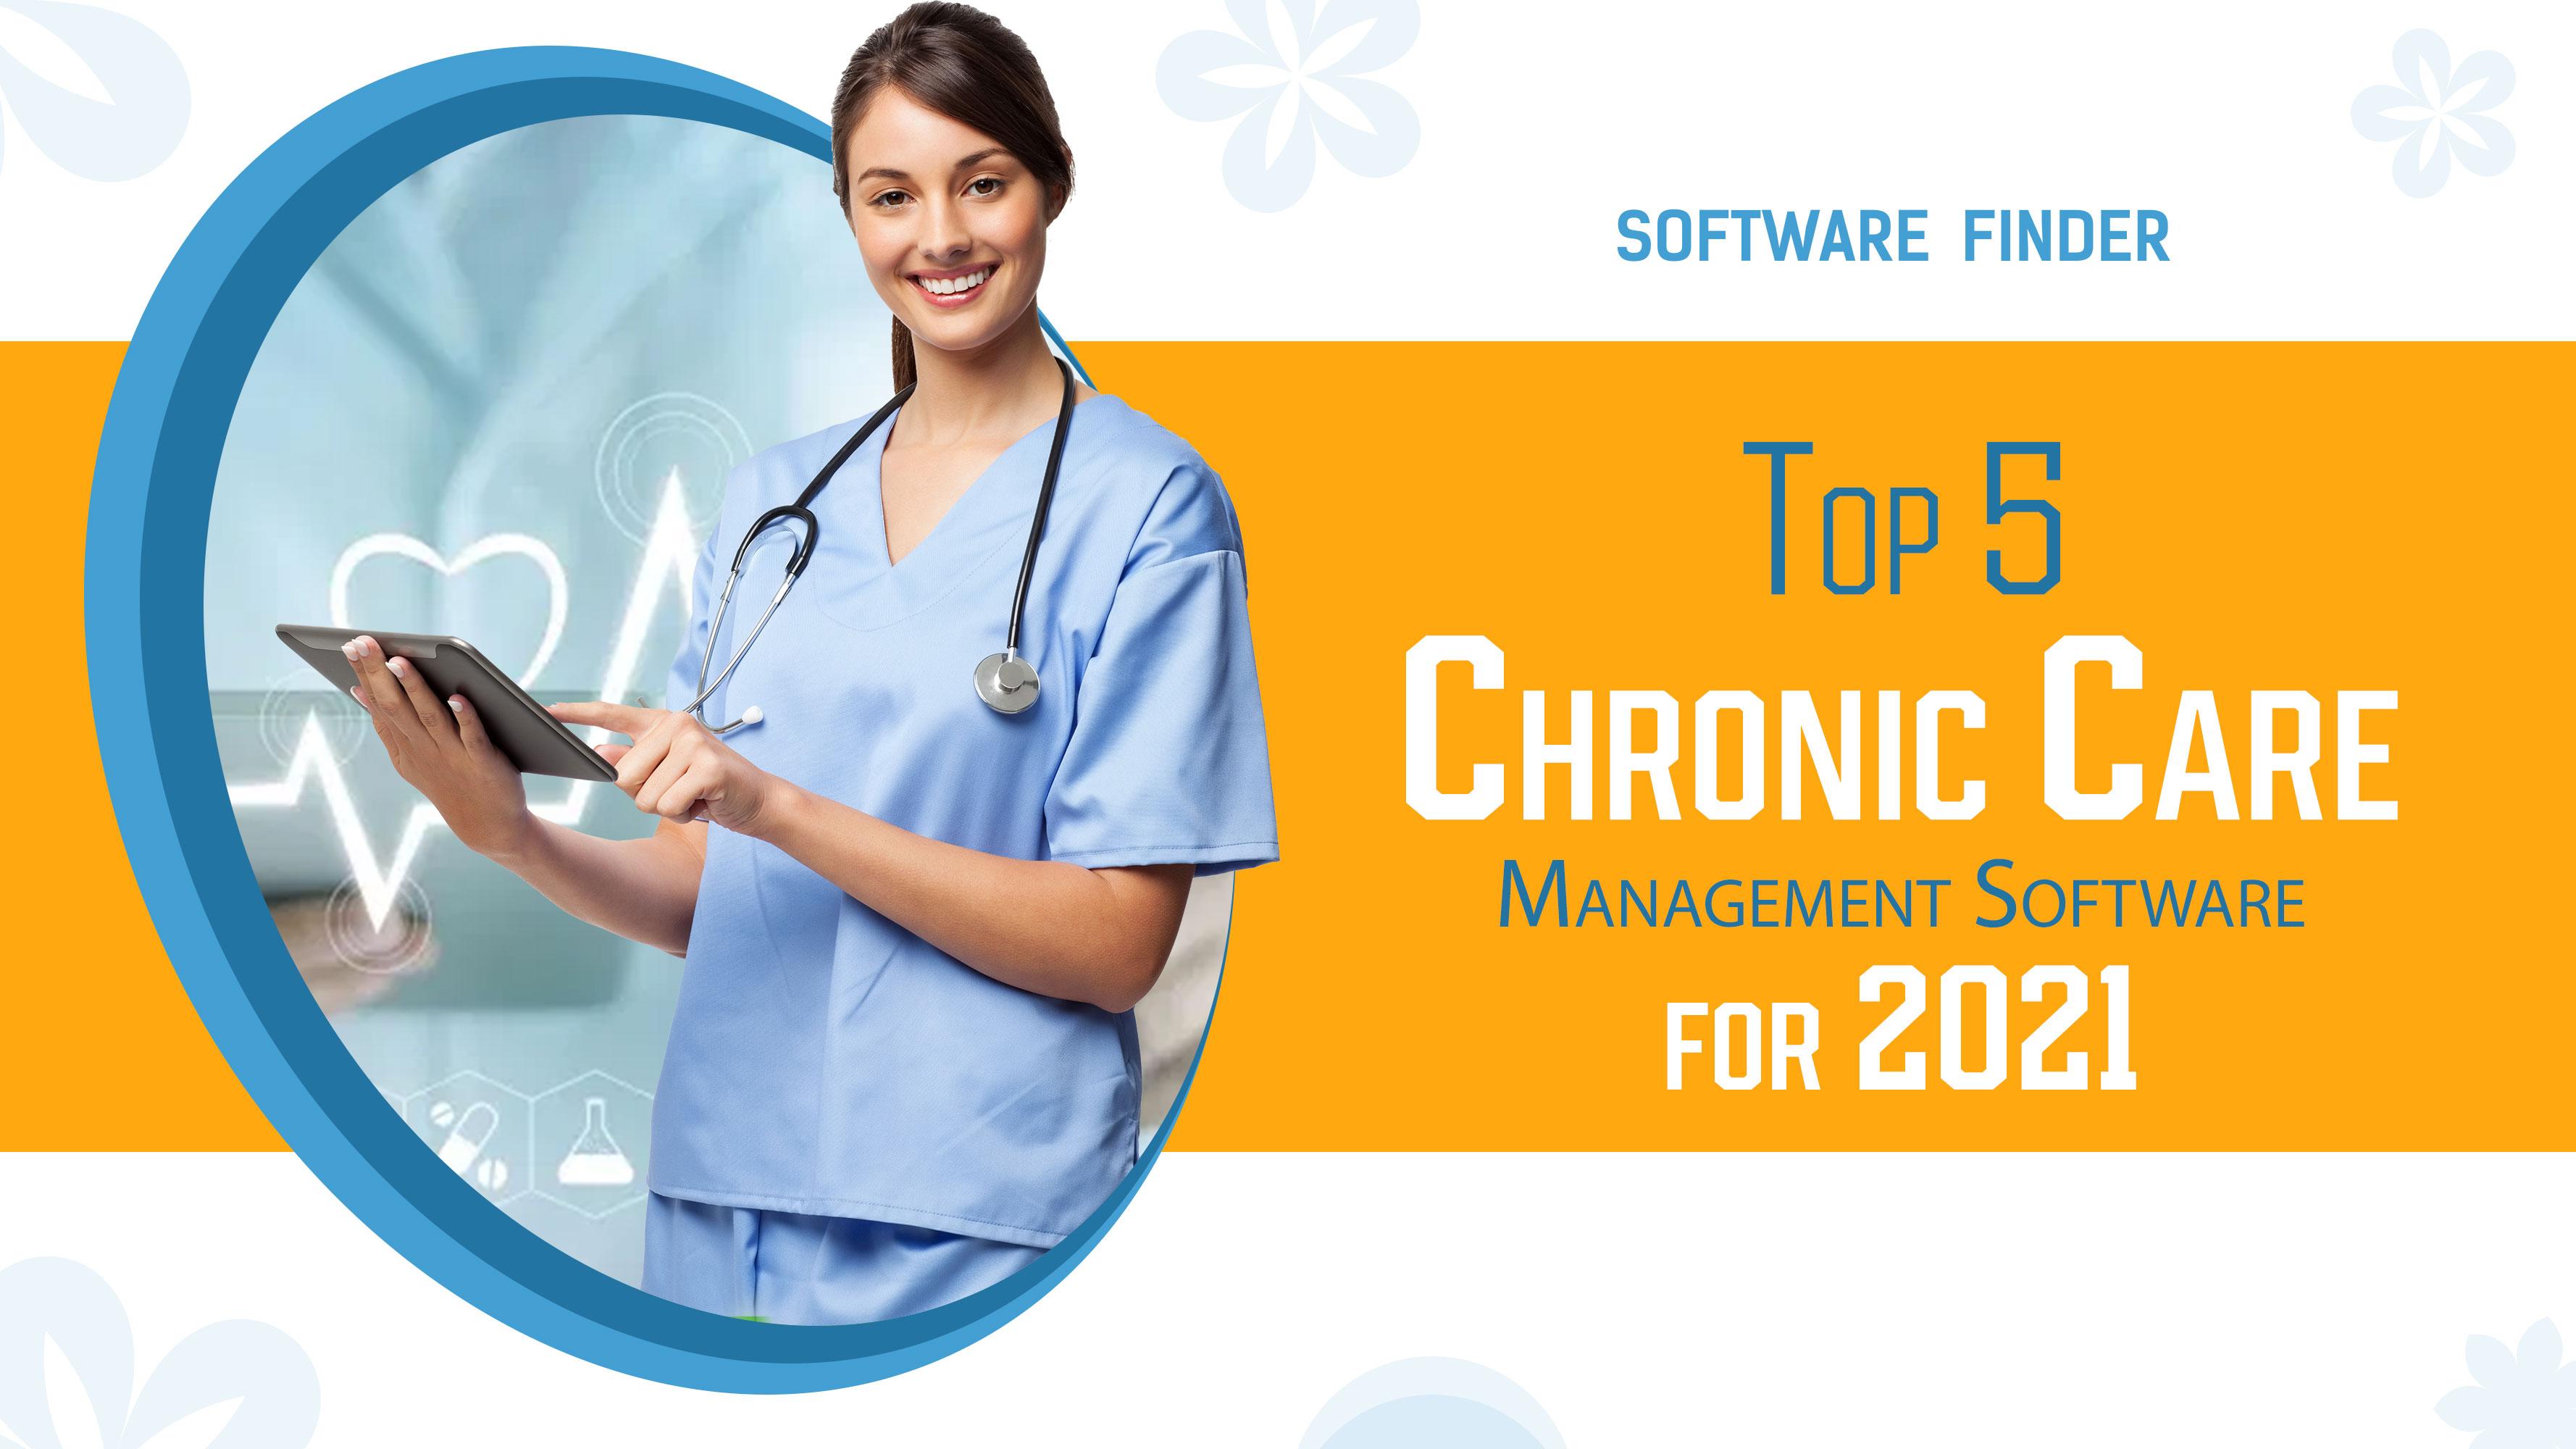 Top 5 Chronic Care Management Software for 2021